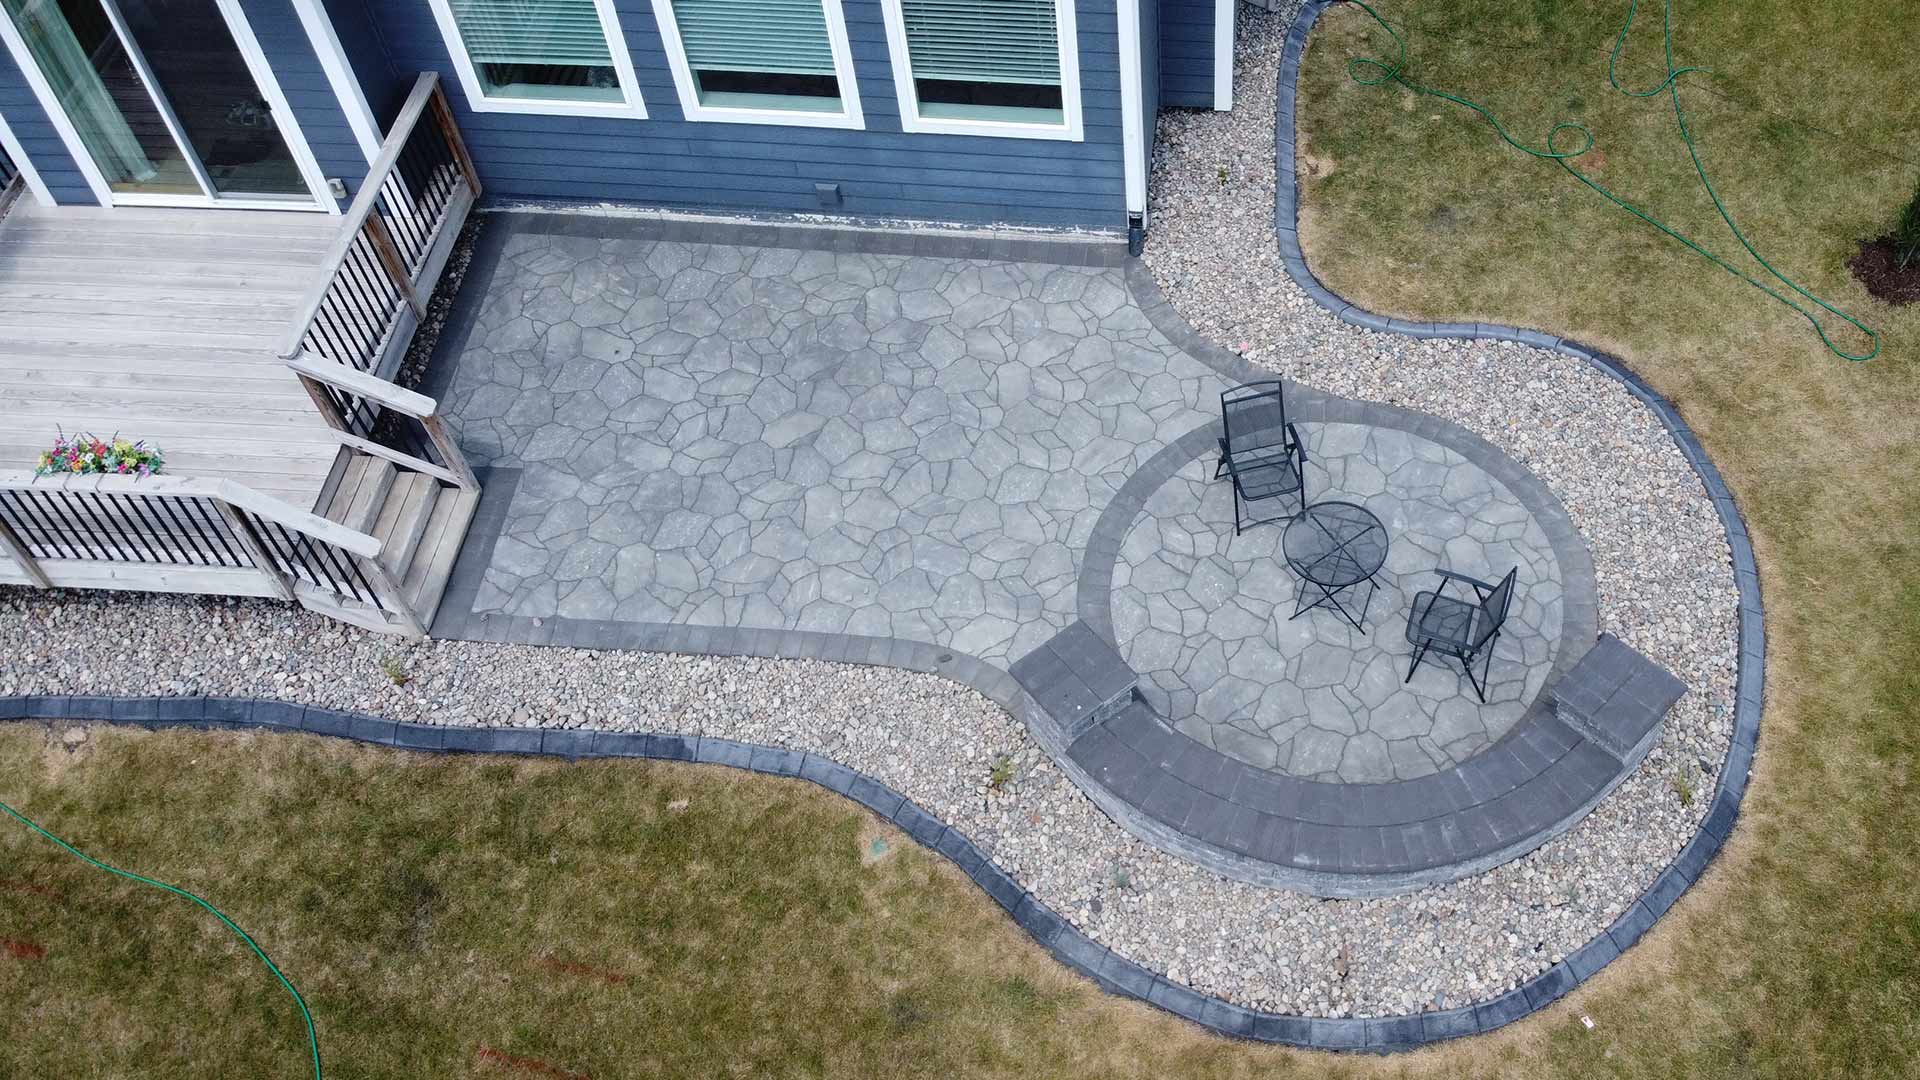 Patio installed for a client's home in Waukee, IA.